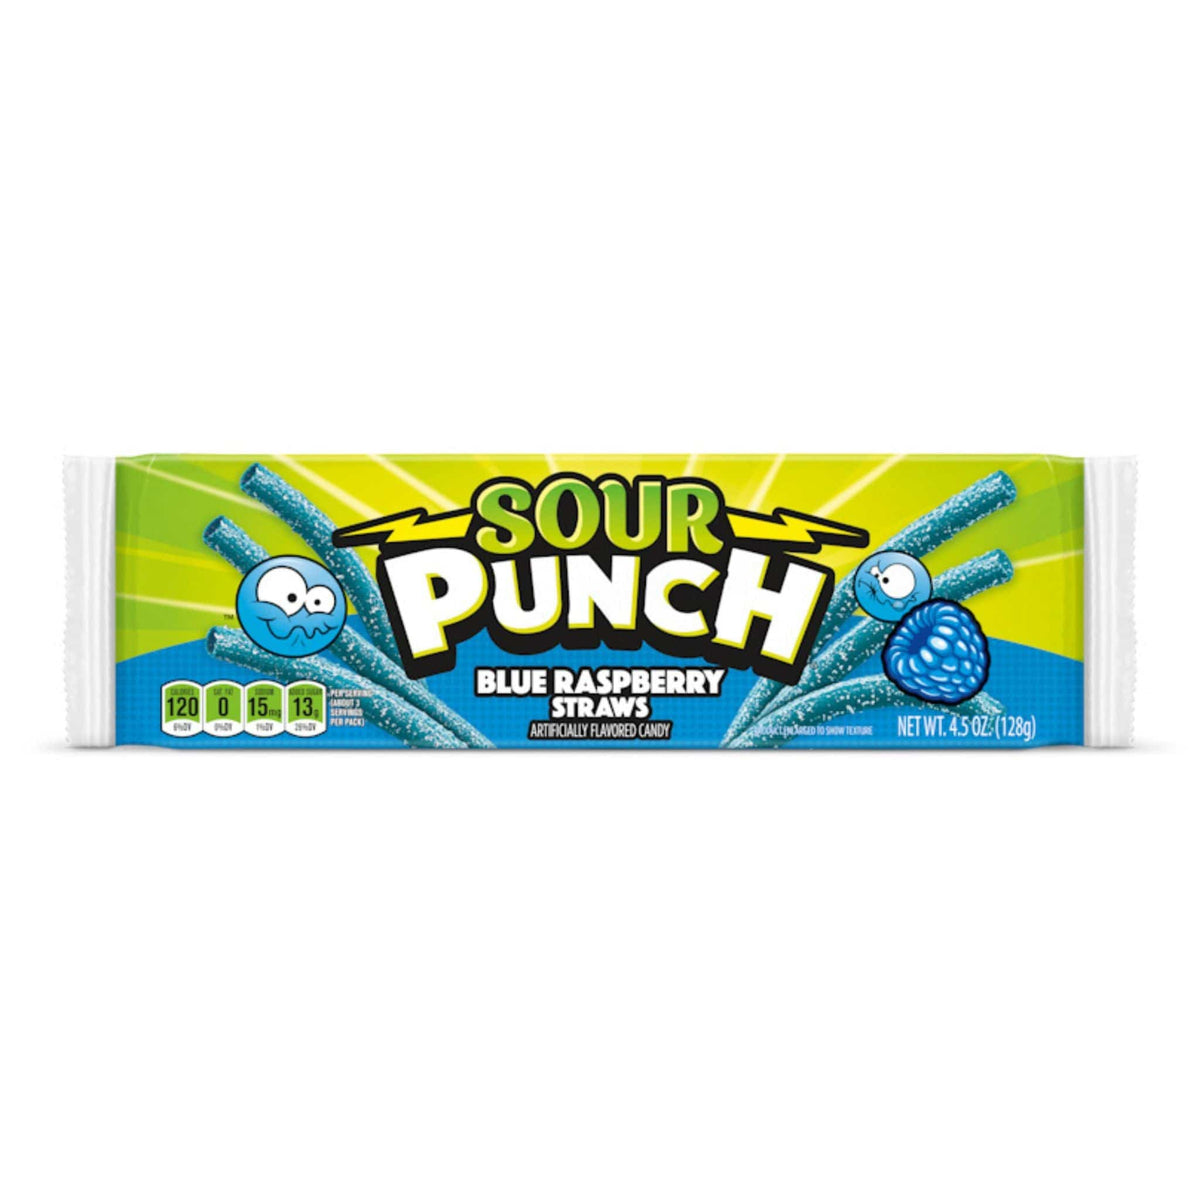 Lolli and Pops Novelty Sour Punch Blue Raspberry Straws